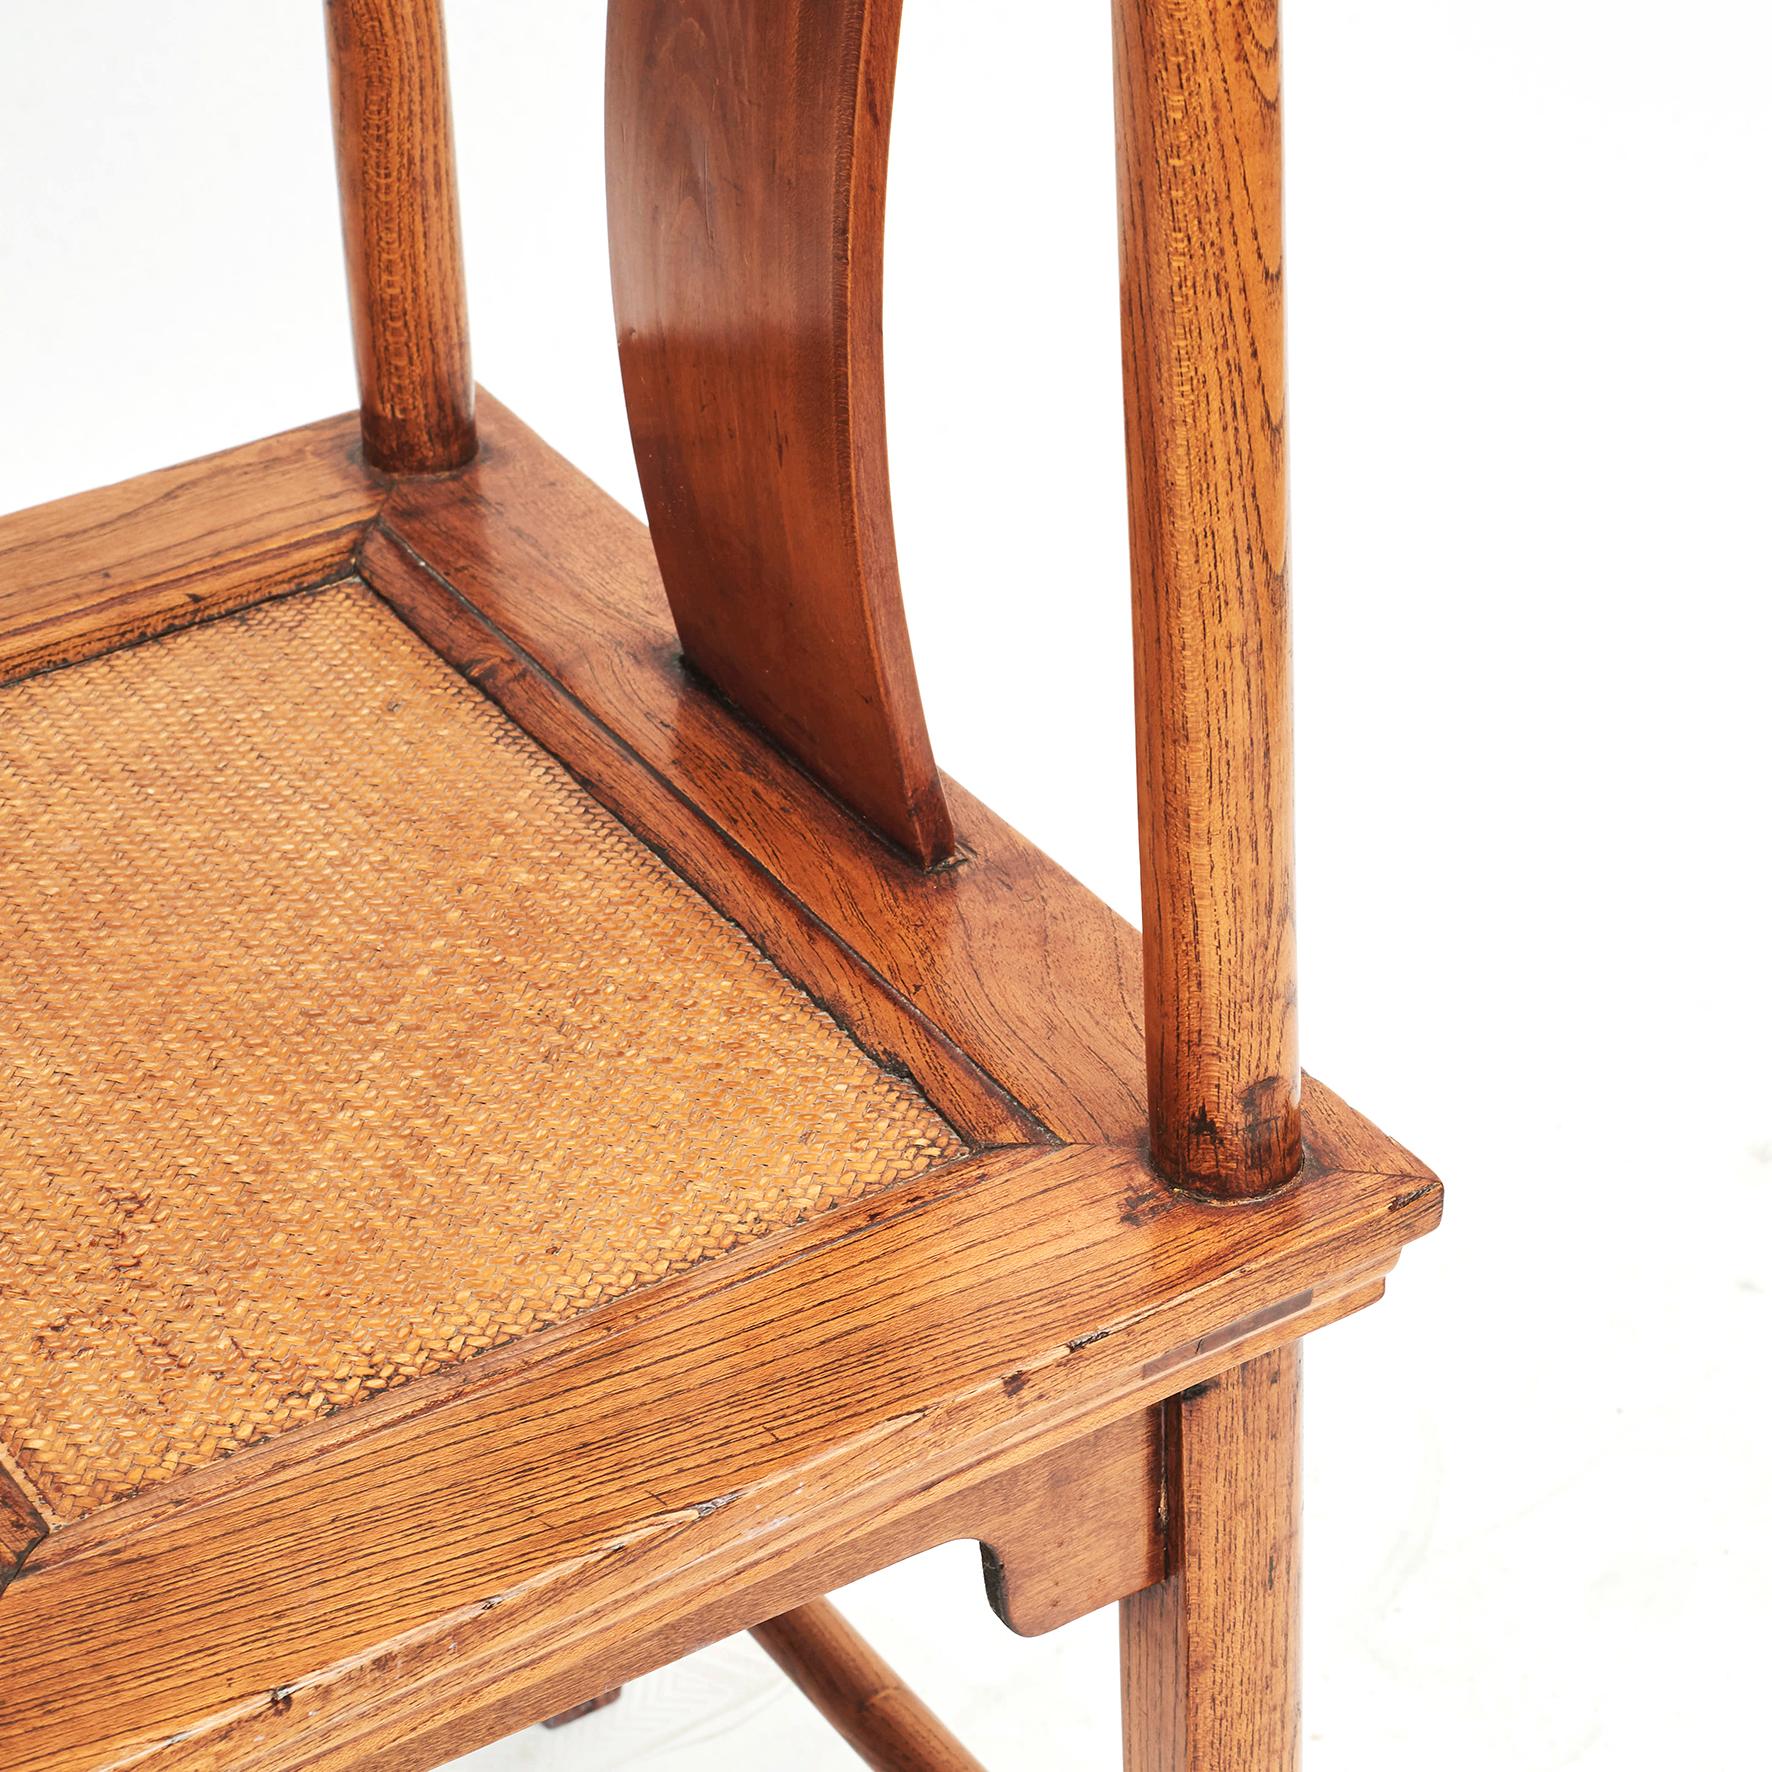 Pair of Mid-19th Century Chinese Ming Style Chairs in Jumu Wood with Wicker Seat 4